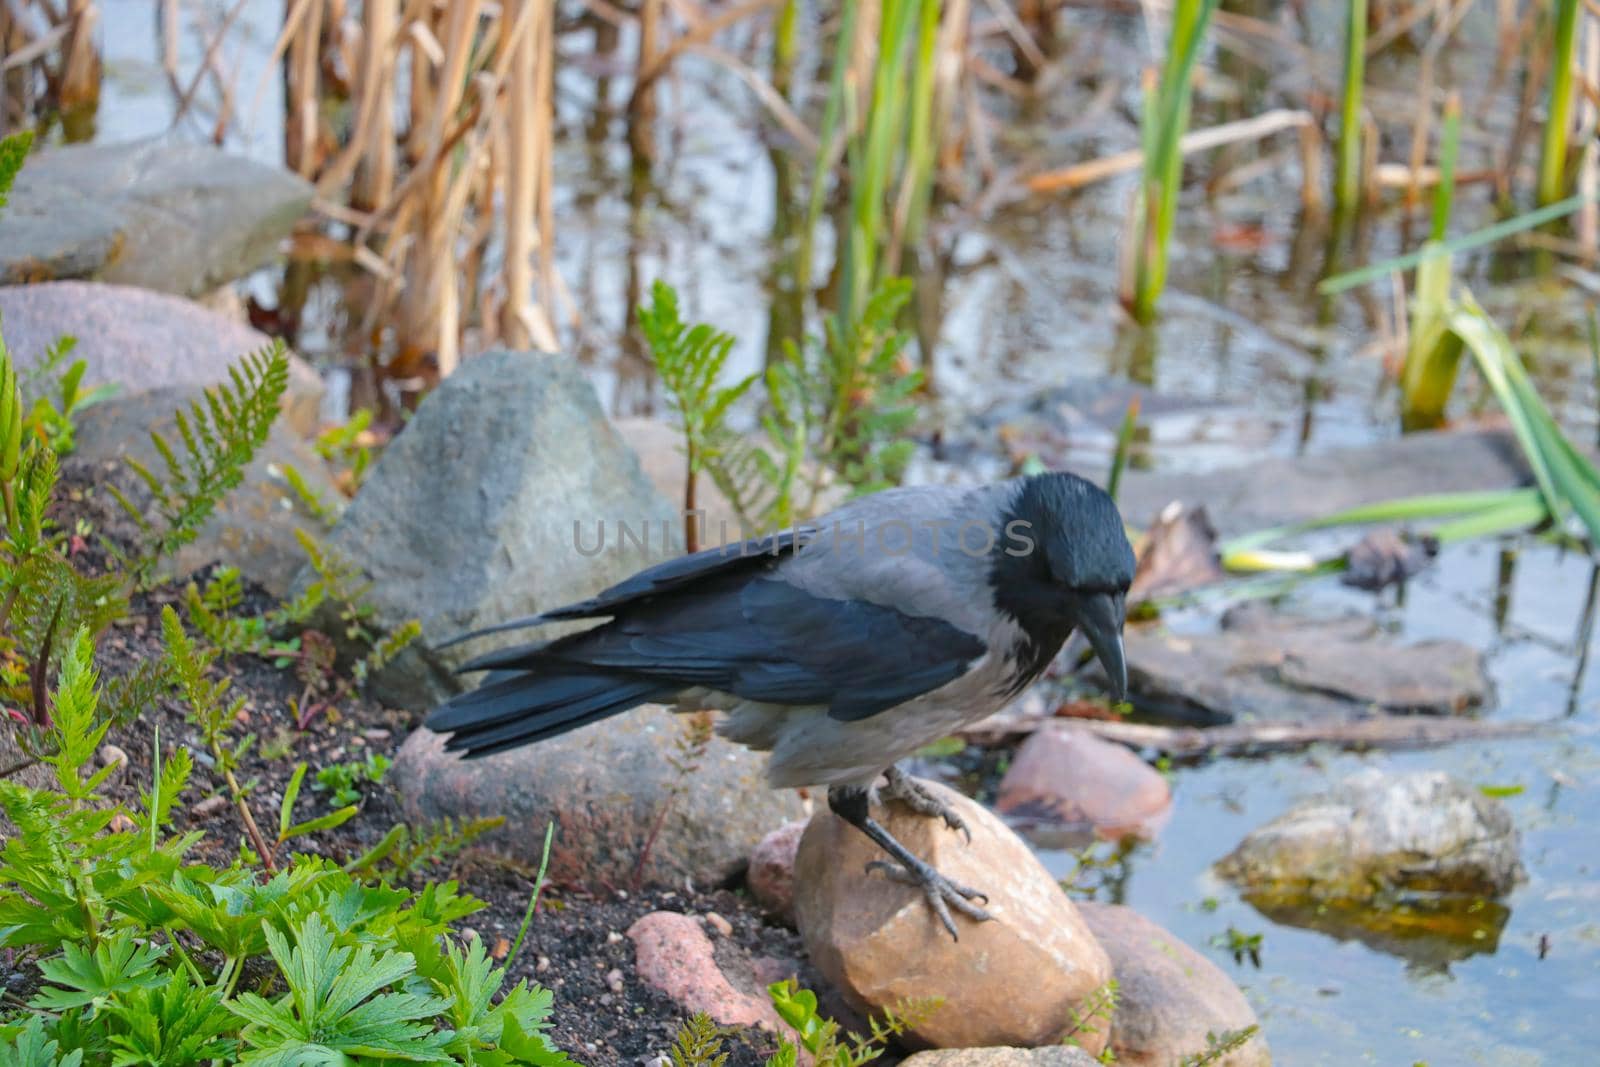 Out of focus, blurry background, crow standing on a rock. by kip02kas